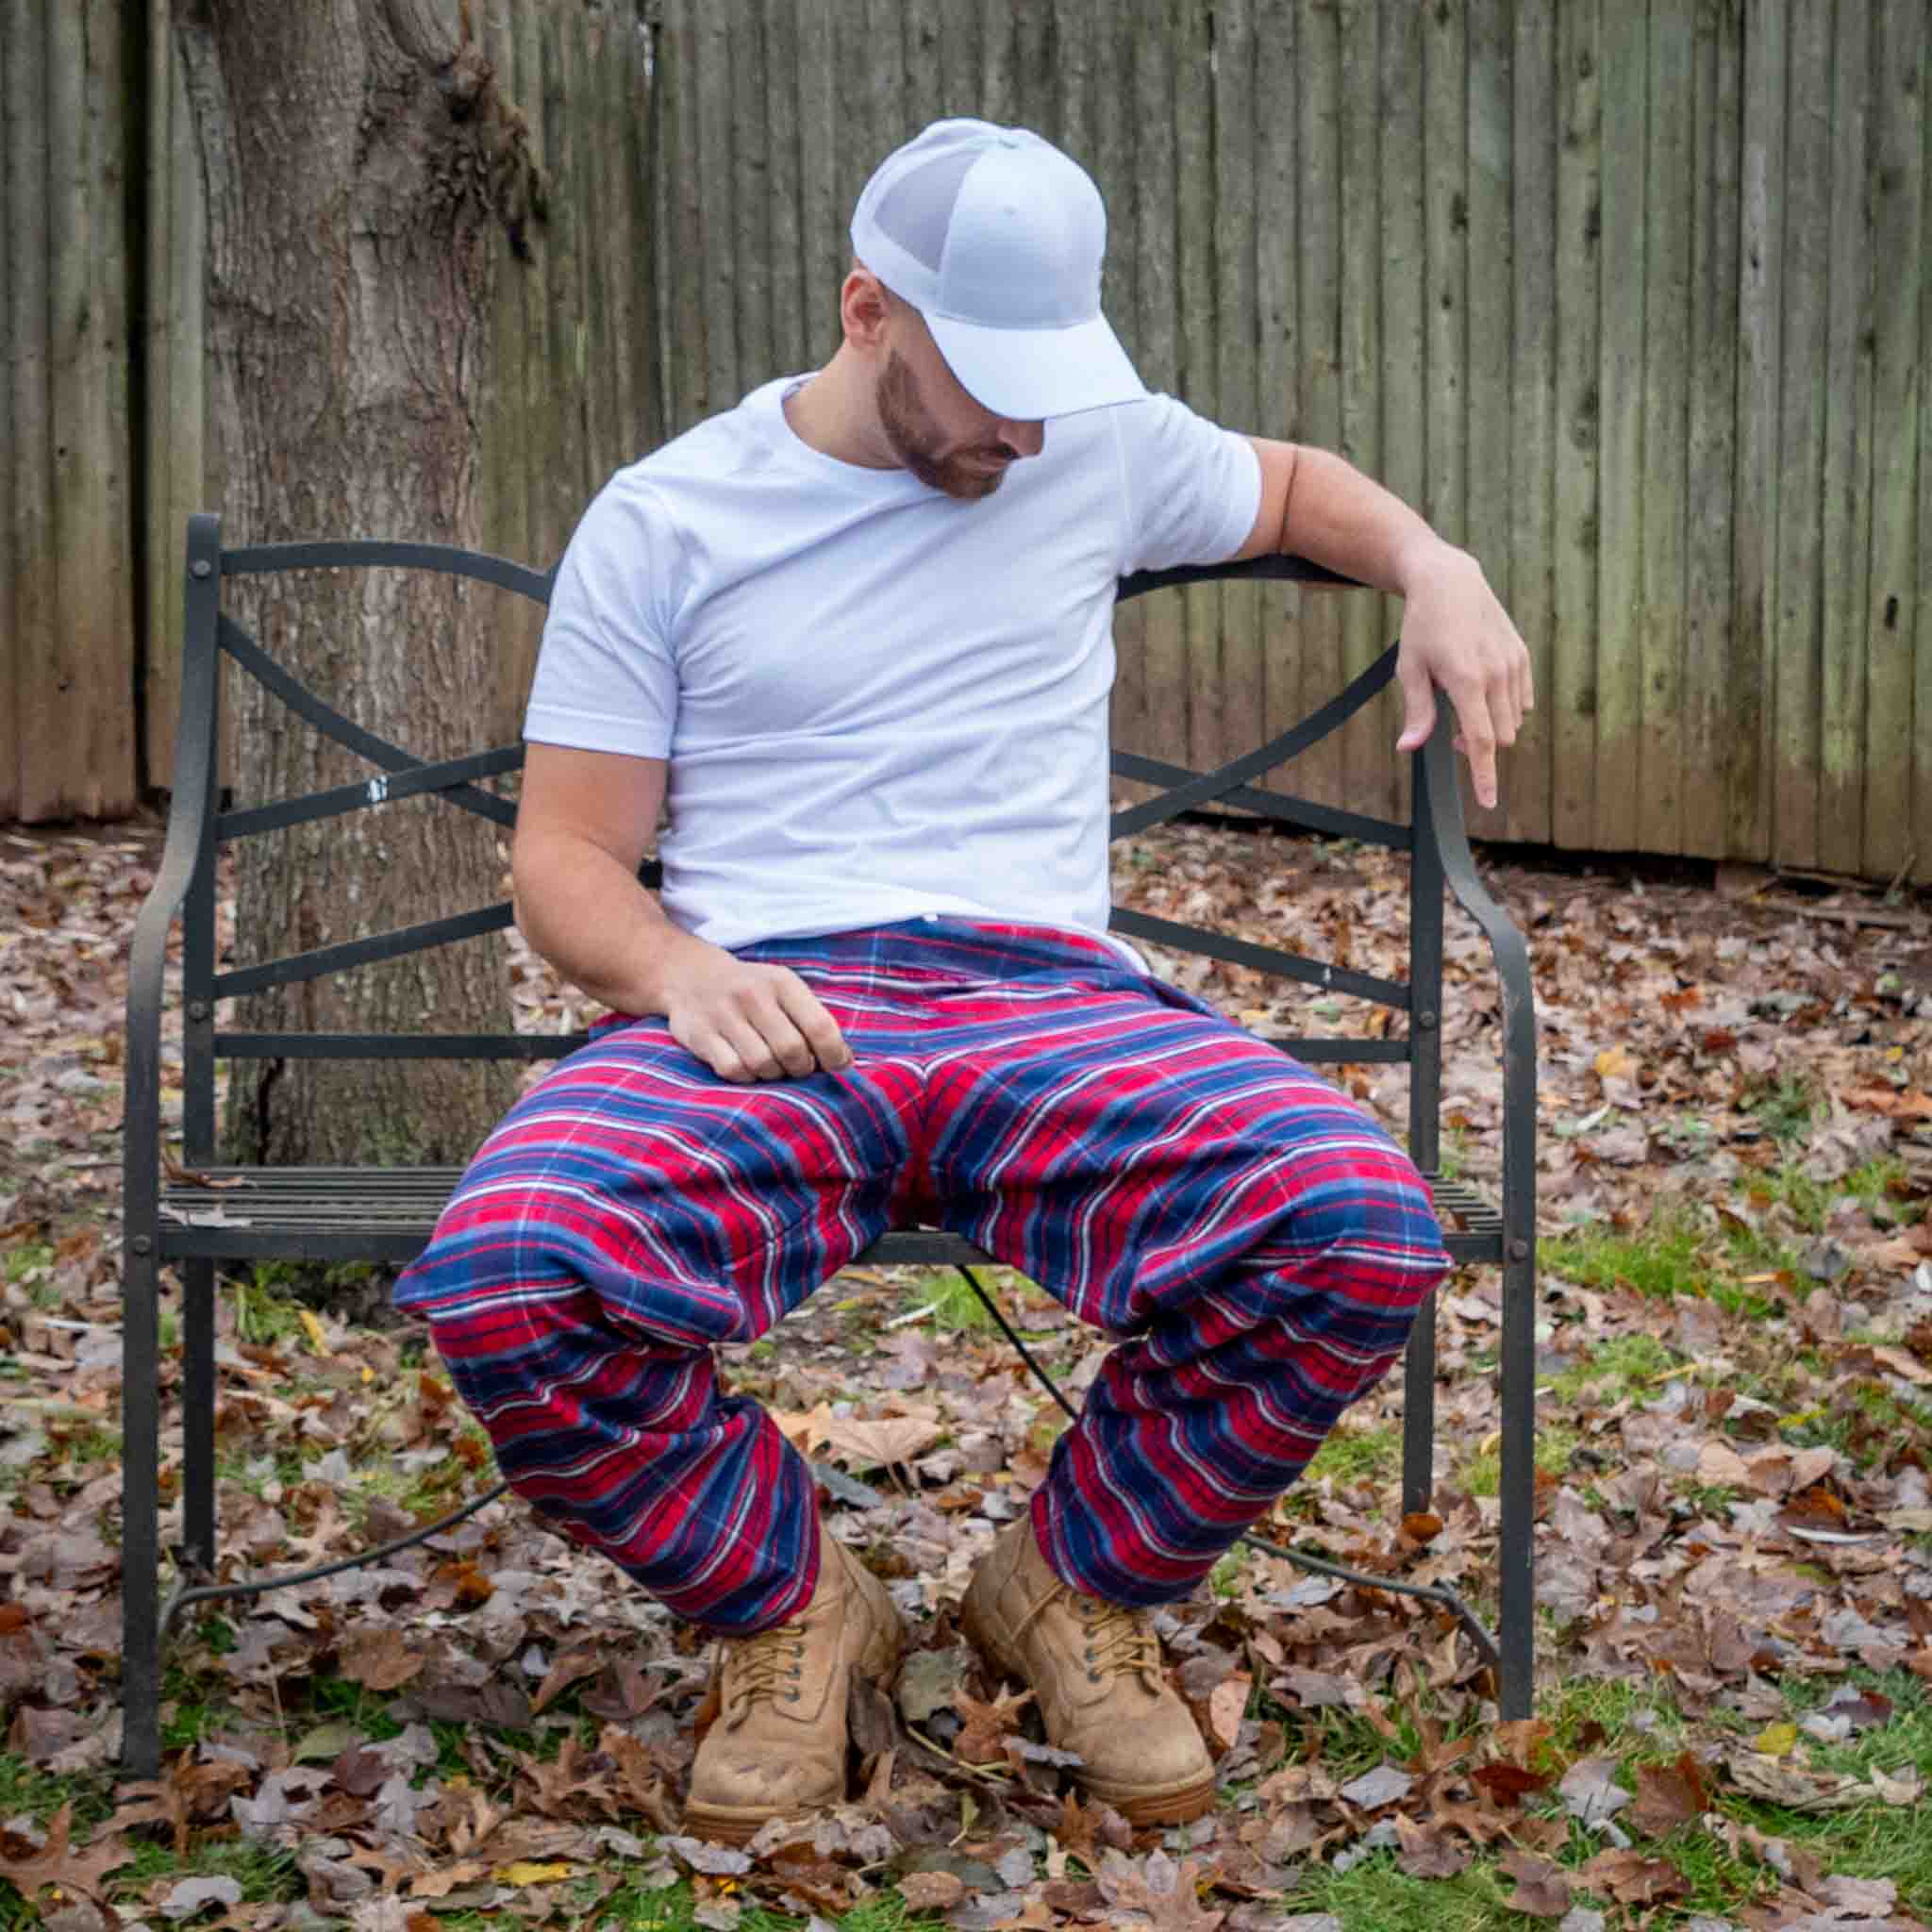 JWM Flannel Lounge Pants Old Glory Compare at $185  ( Allow 1-2 weeks for delivery )